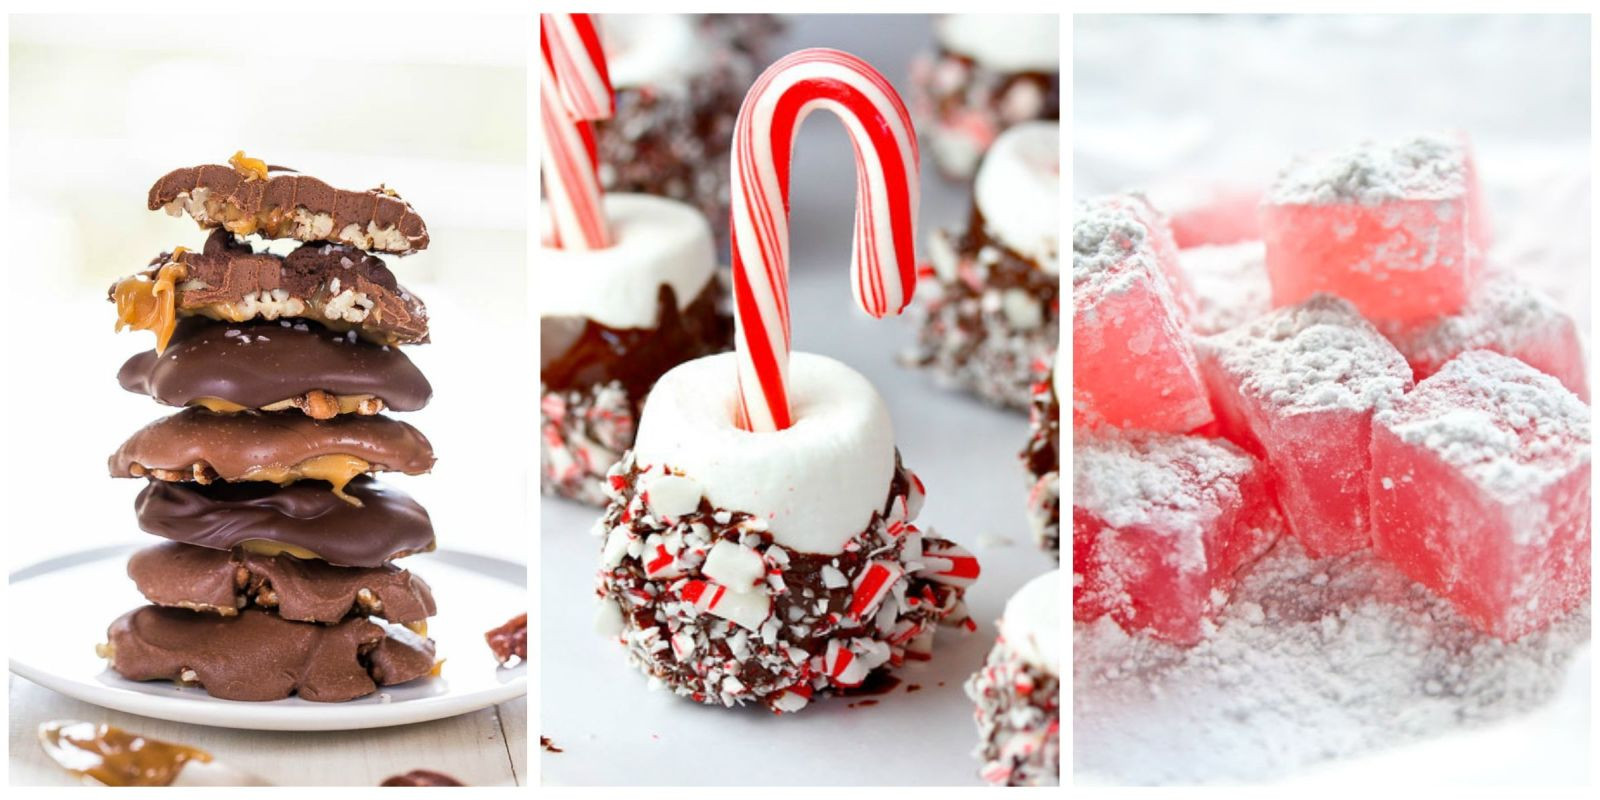 Candy To Make For Christmas
 25 Easy Christmas Candy Recipes Ideas for Homemade